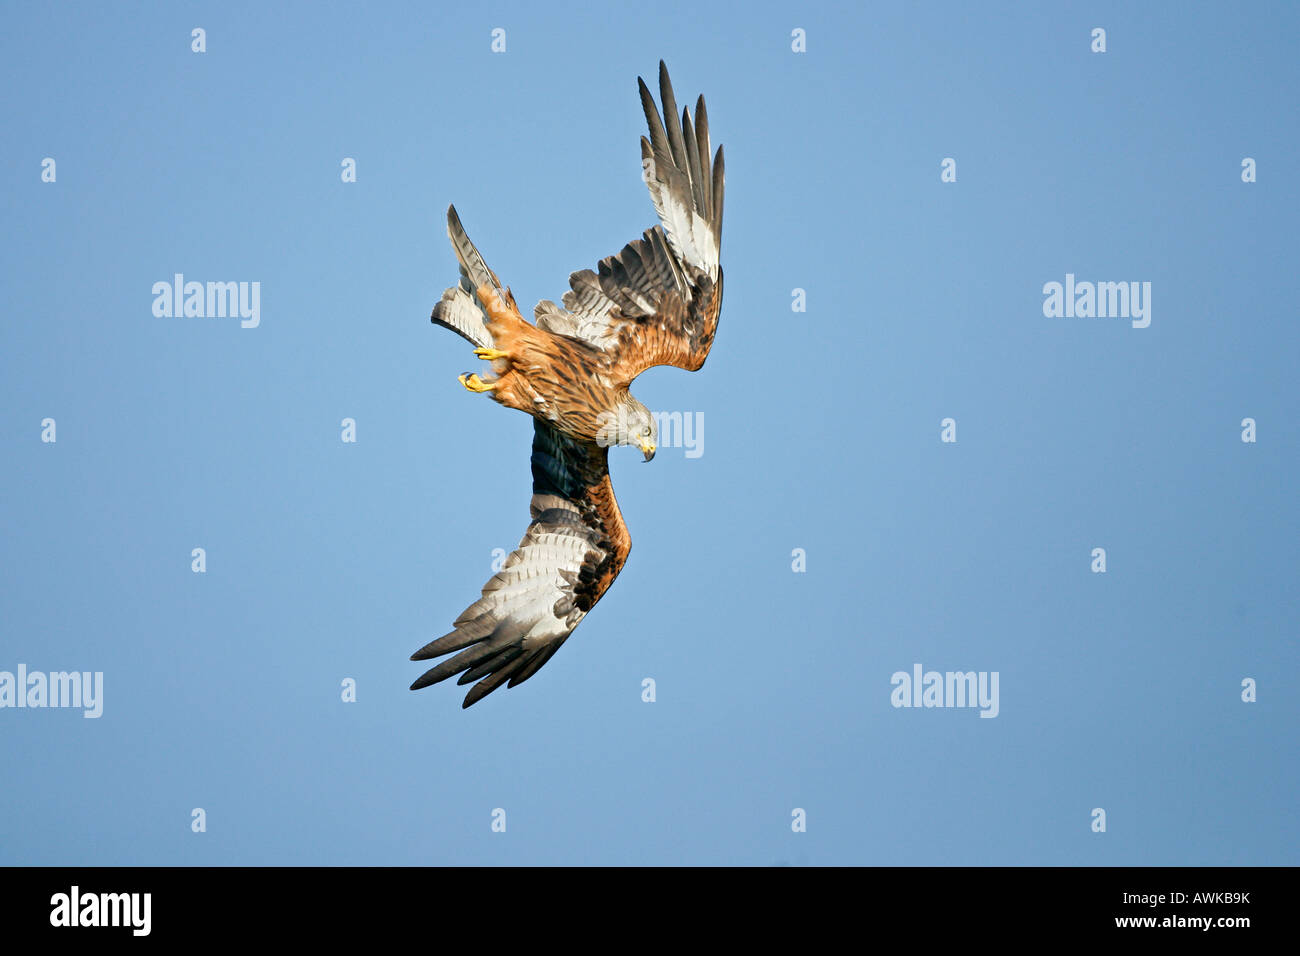 RED KITE Milvus milvus diving to pick up food from the ground Wales October RedKite0774 Stock Photo